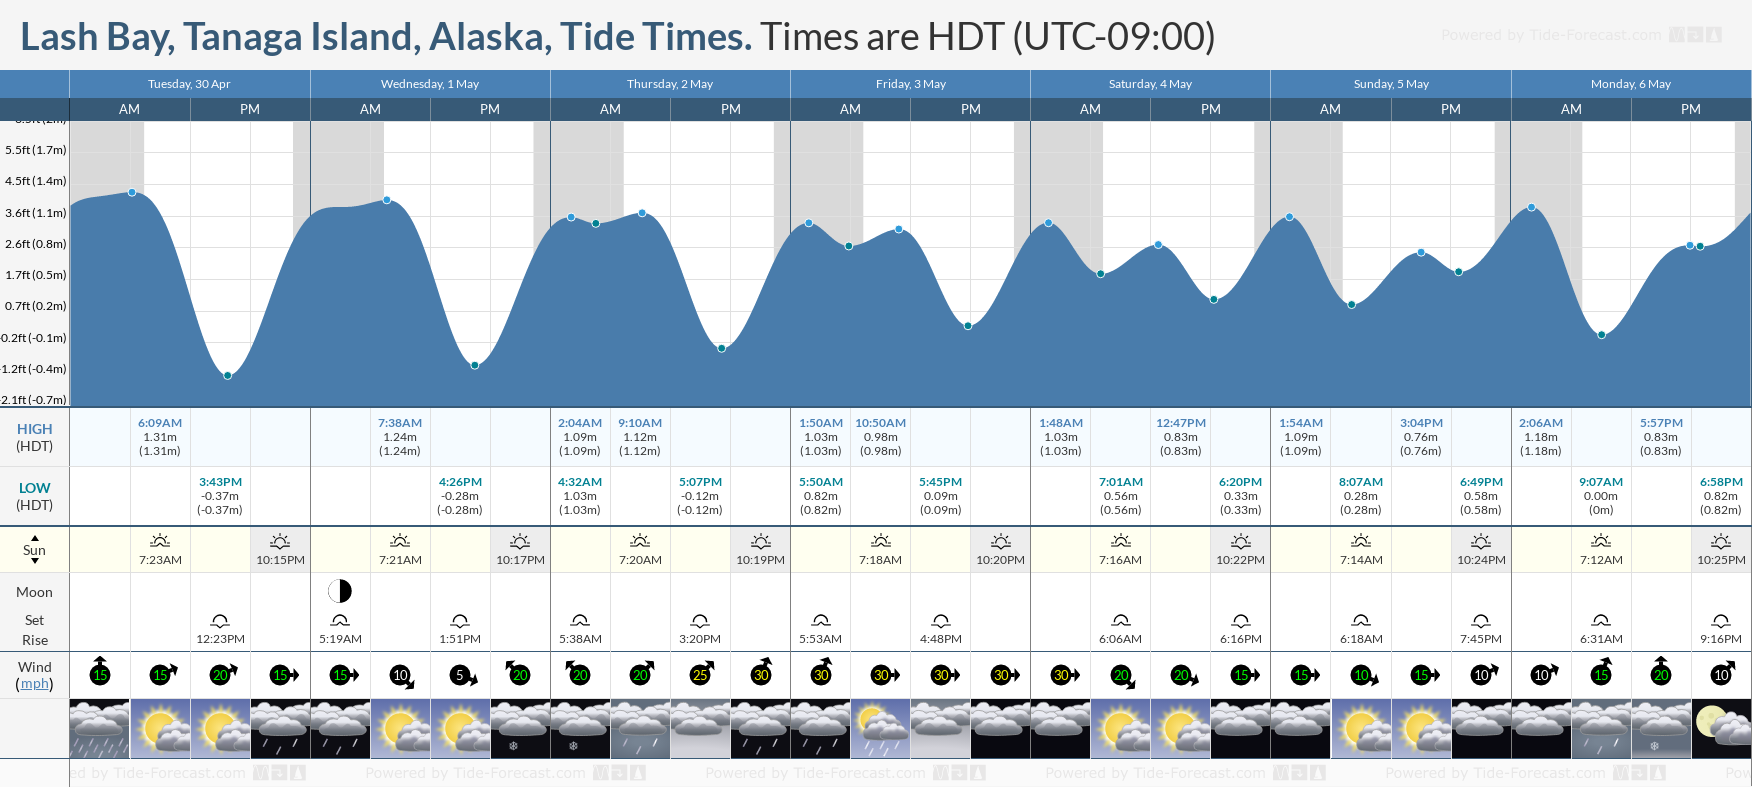 Lash Bay, Tanaga Island, Alaska Tide Chart including high and low tide times for the next 7 days